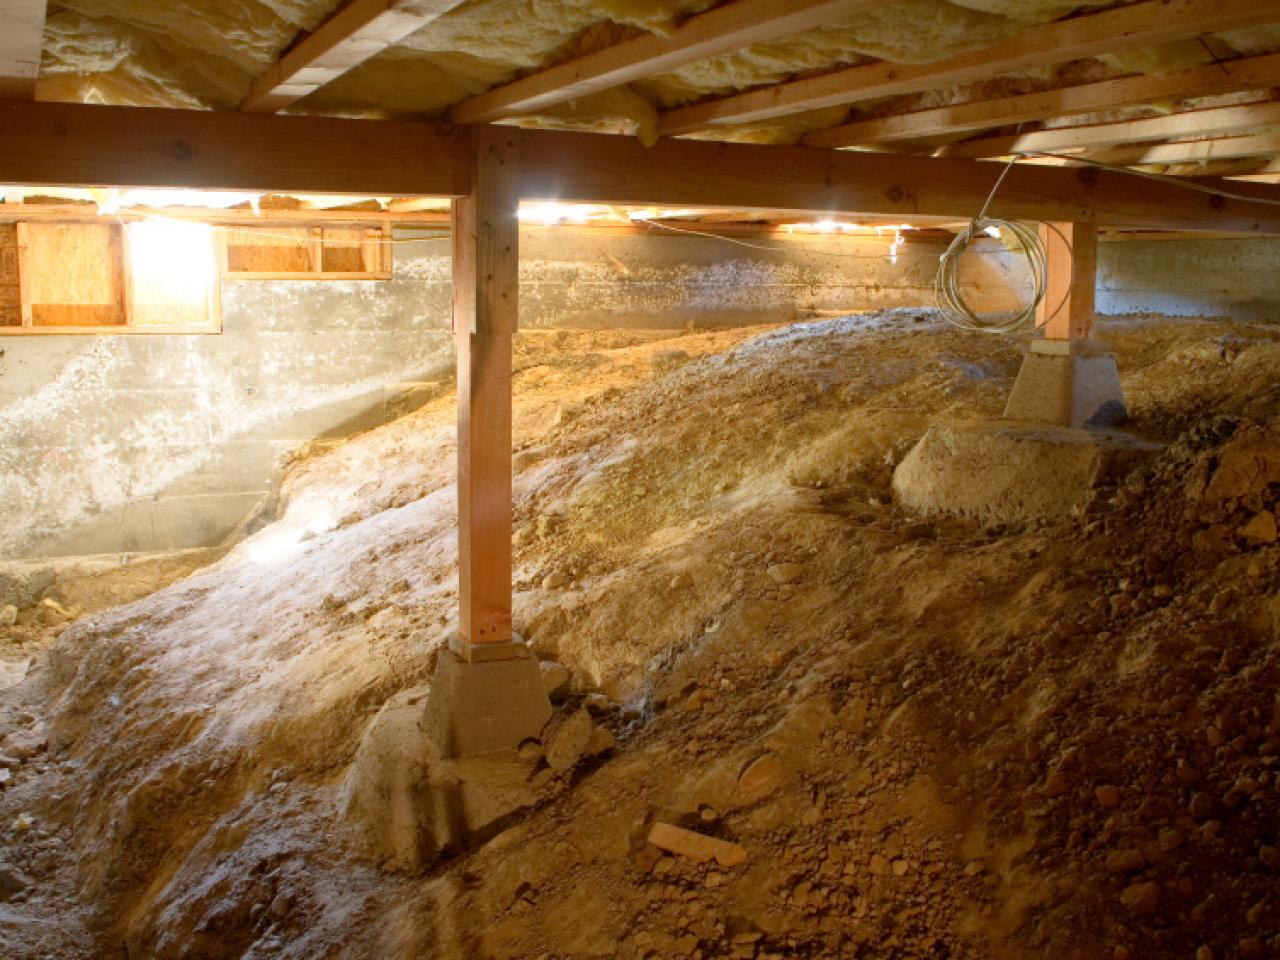 Crawl Space Issues And Solutions, Can A Crawl Space Be Converted To Basement